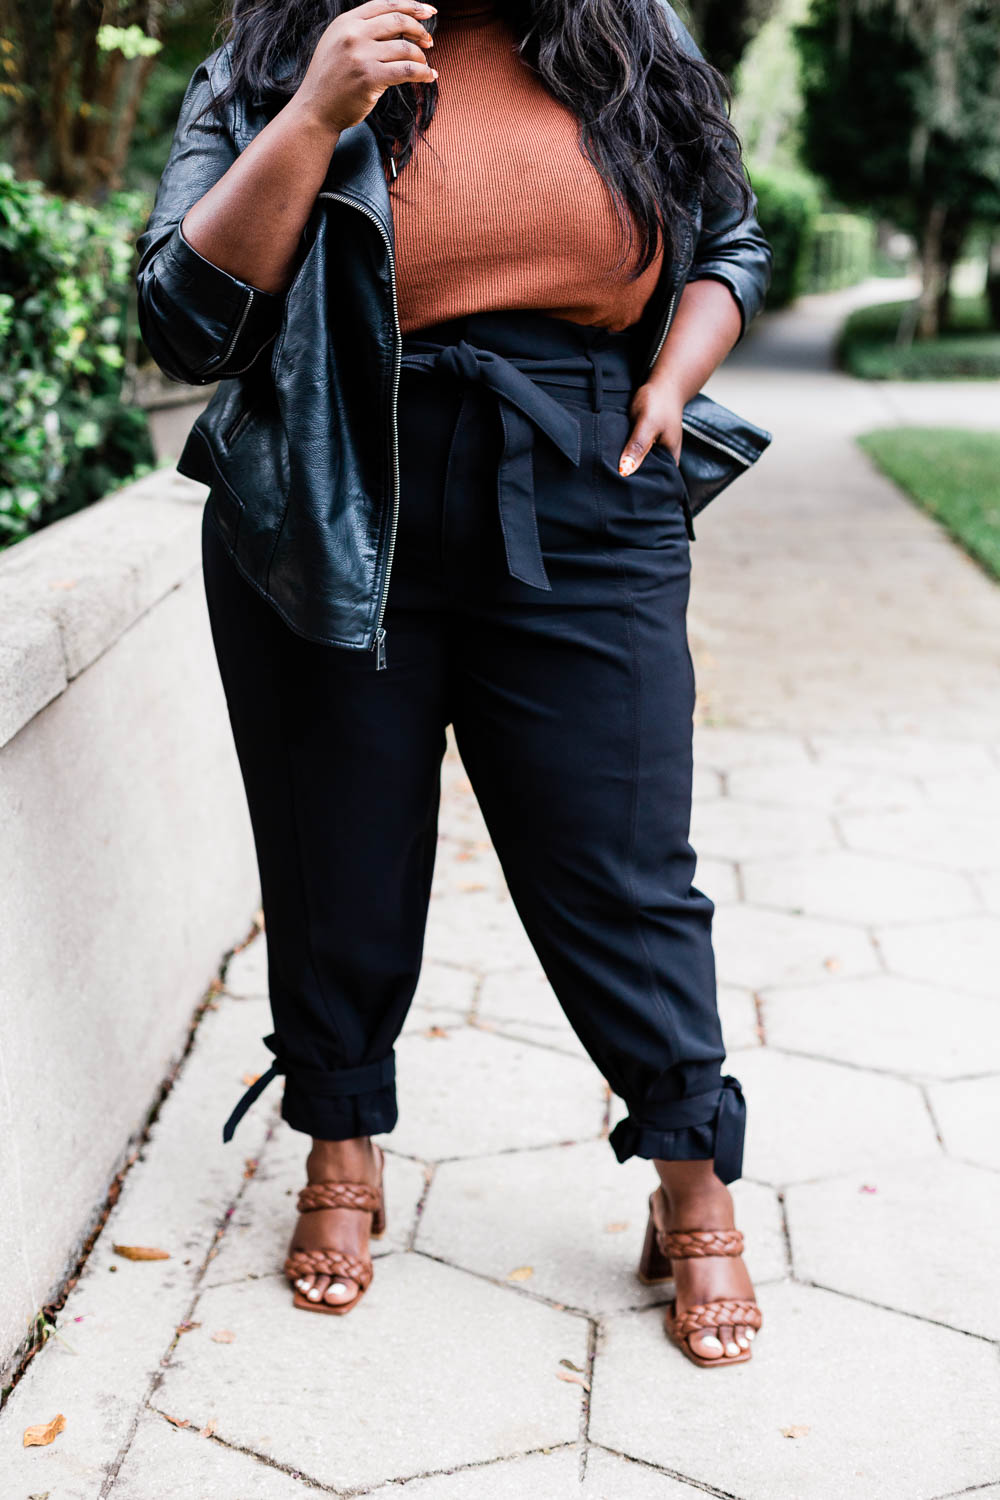 THAMARR, MUSINGS OF A CURVY LADY, JCPENNEY, LEVI'S, MOTO JACKET, PLUS SIZE MOTO, FALL FASHION, PLUS SIZE FALL OUTFIT